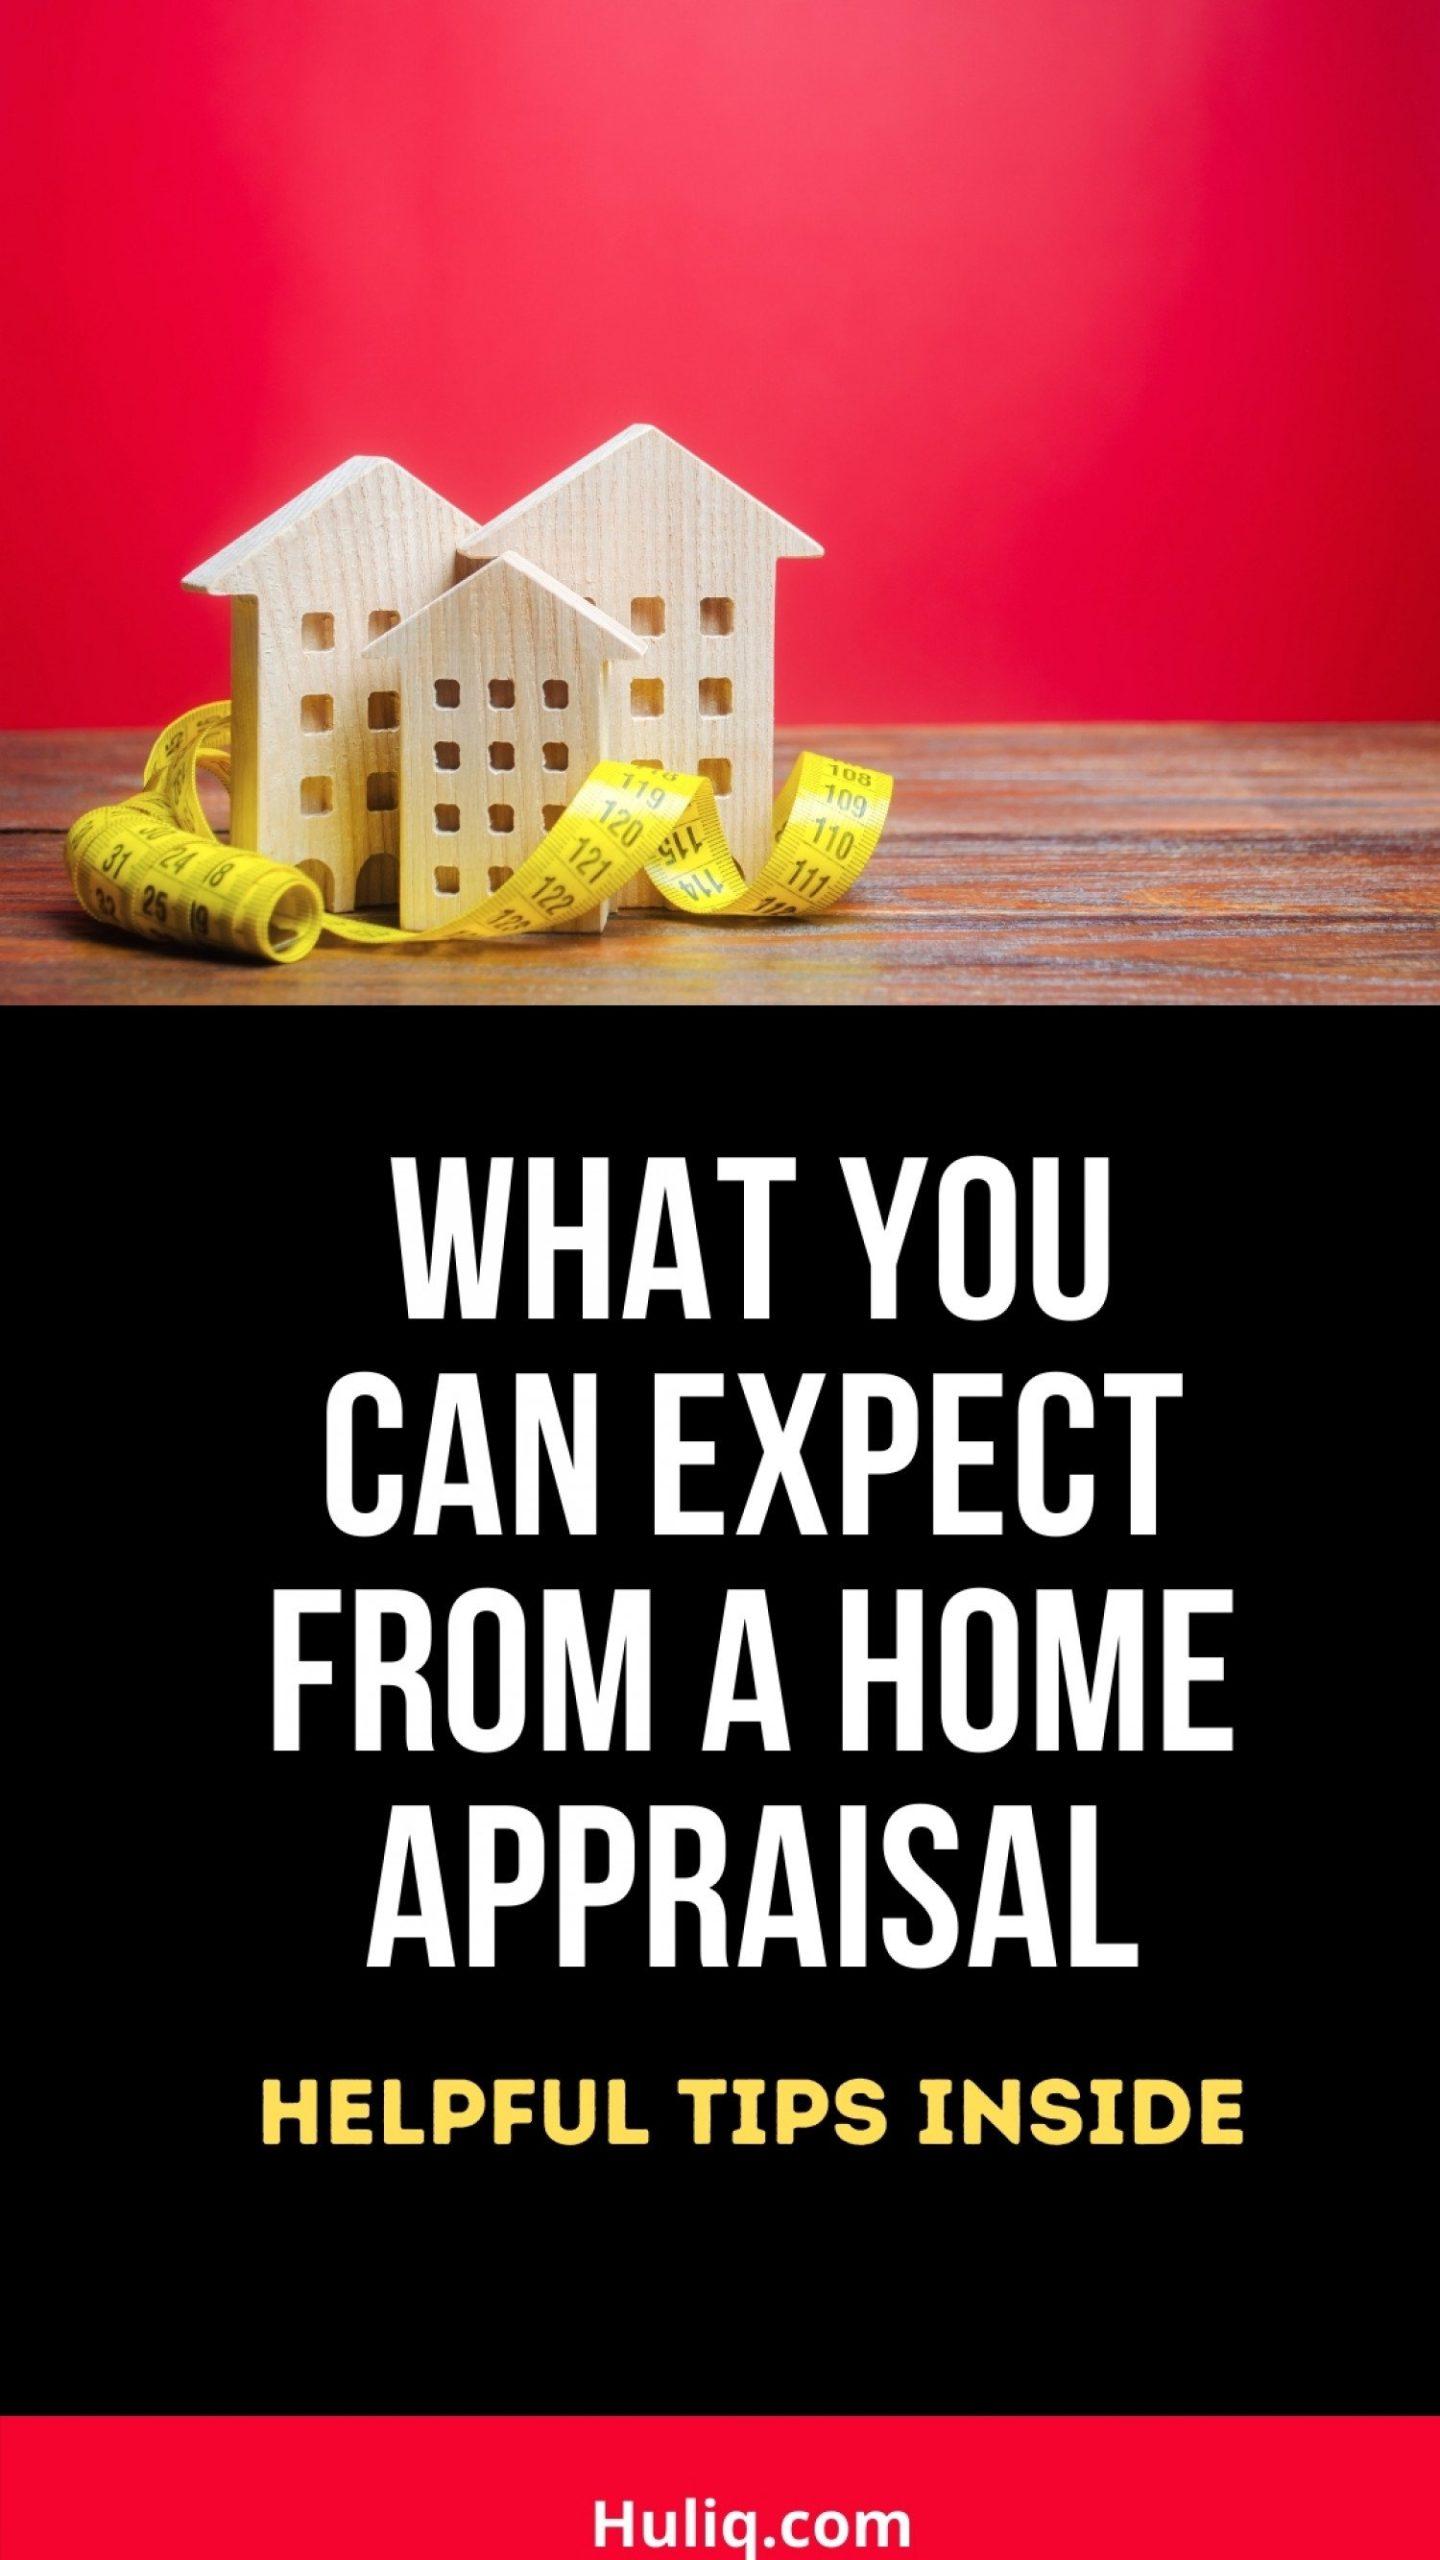 Do realtors tell the appraiser how much the property is selling for